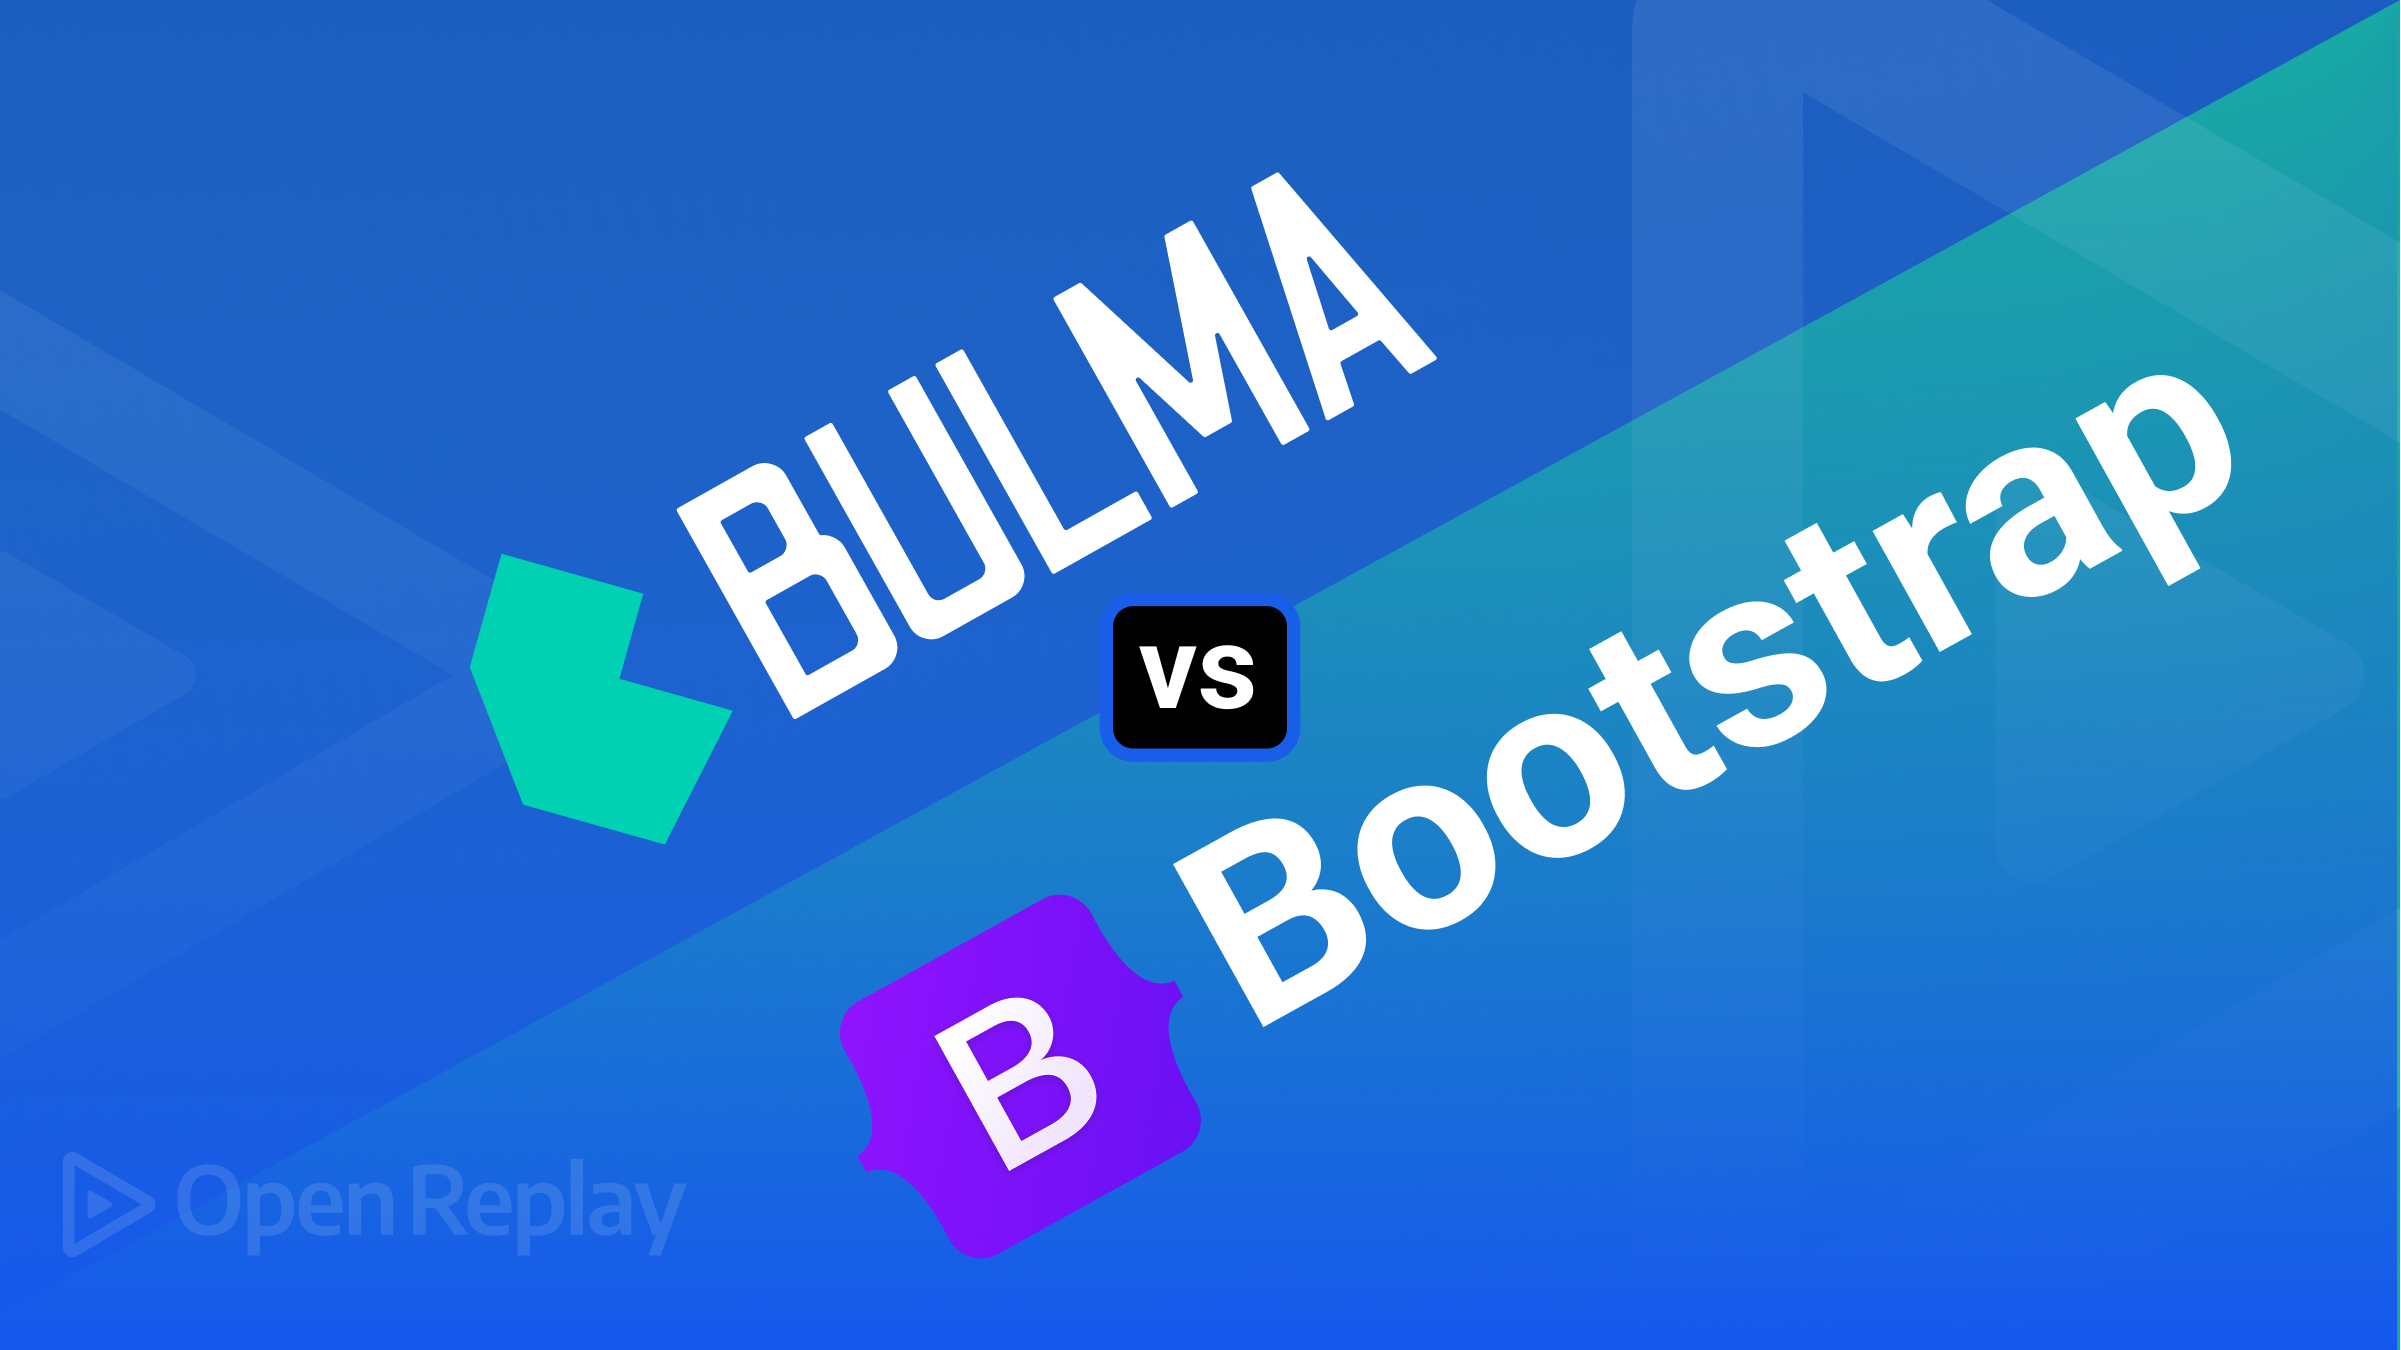 Bulma vs. Bootstrap -- What are their differences?